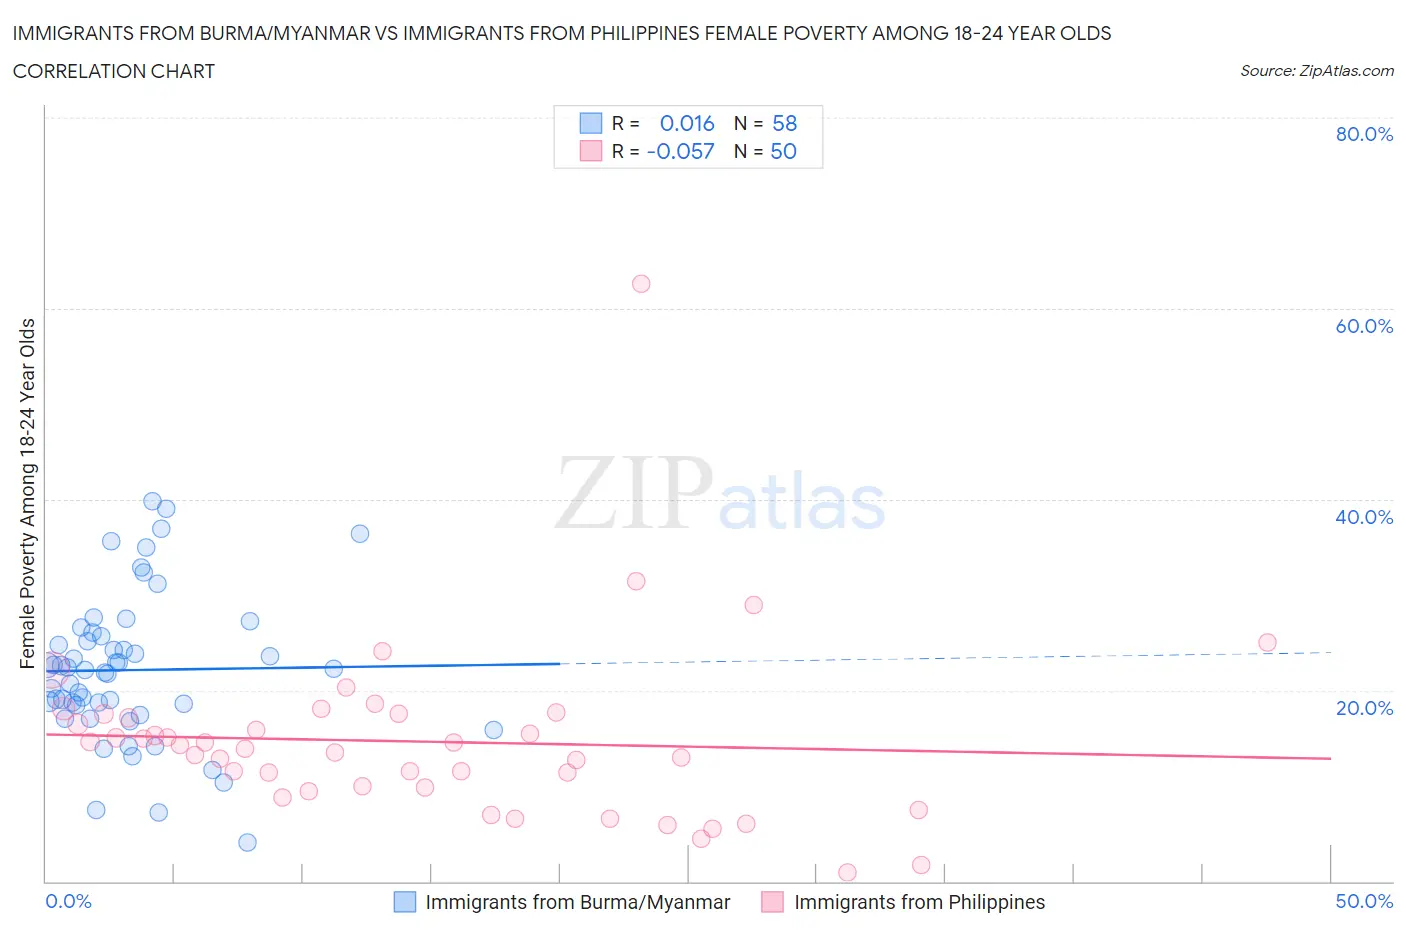 Immigrants from Burma/Myanmar vs Immigrants from Philippines Female Poverty Among 18-24 Year Olds